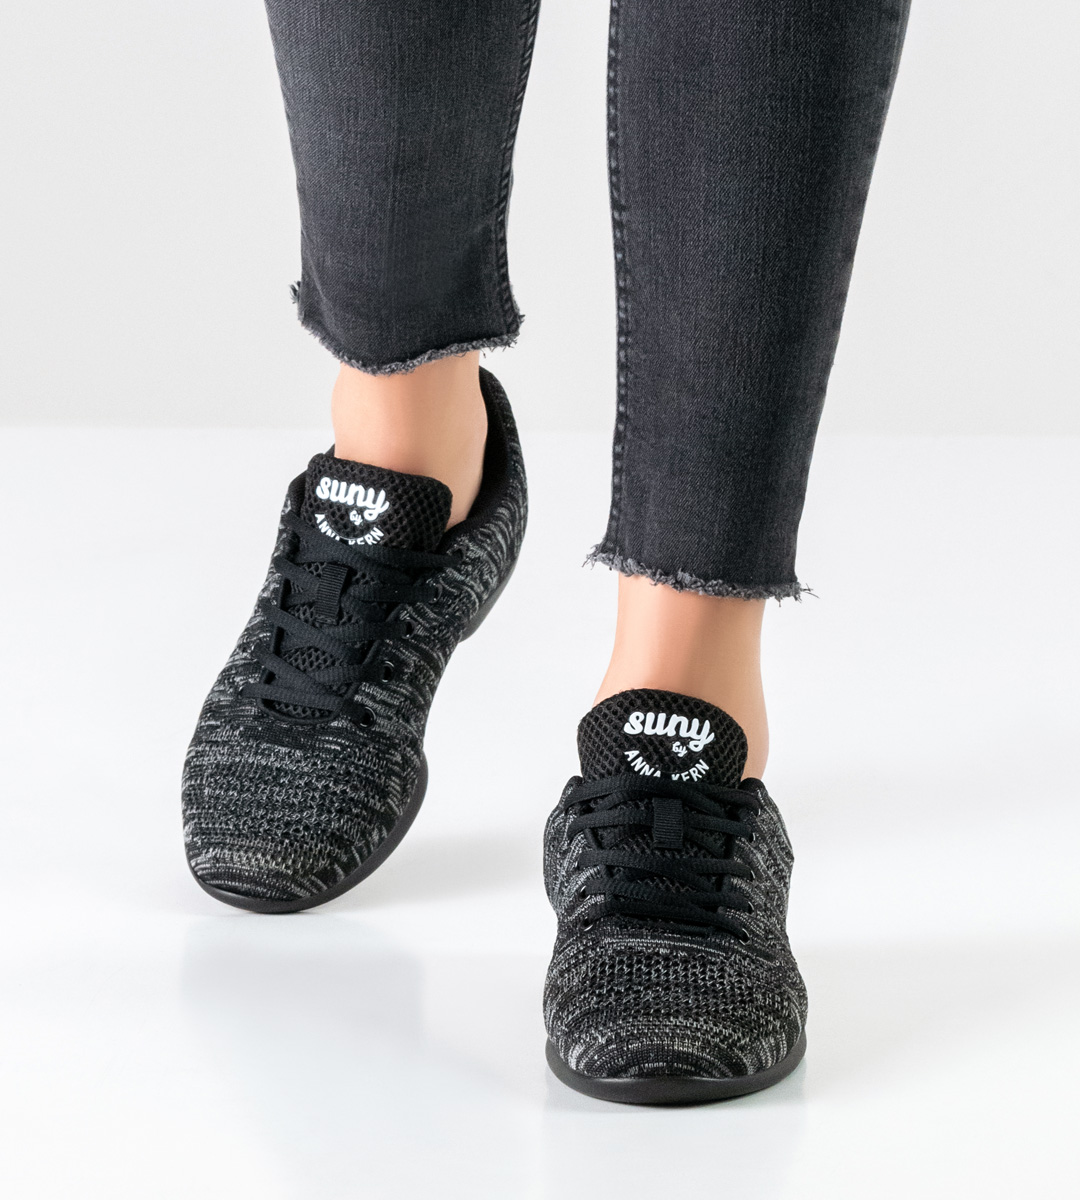 Training women's dance sneakers by Suny in combination with black trousers